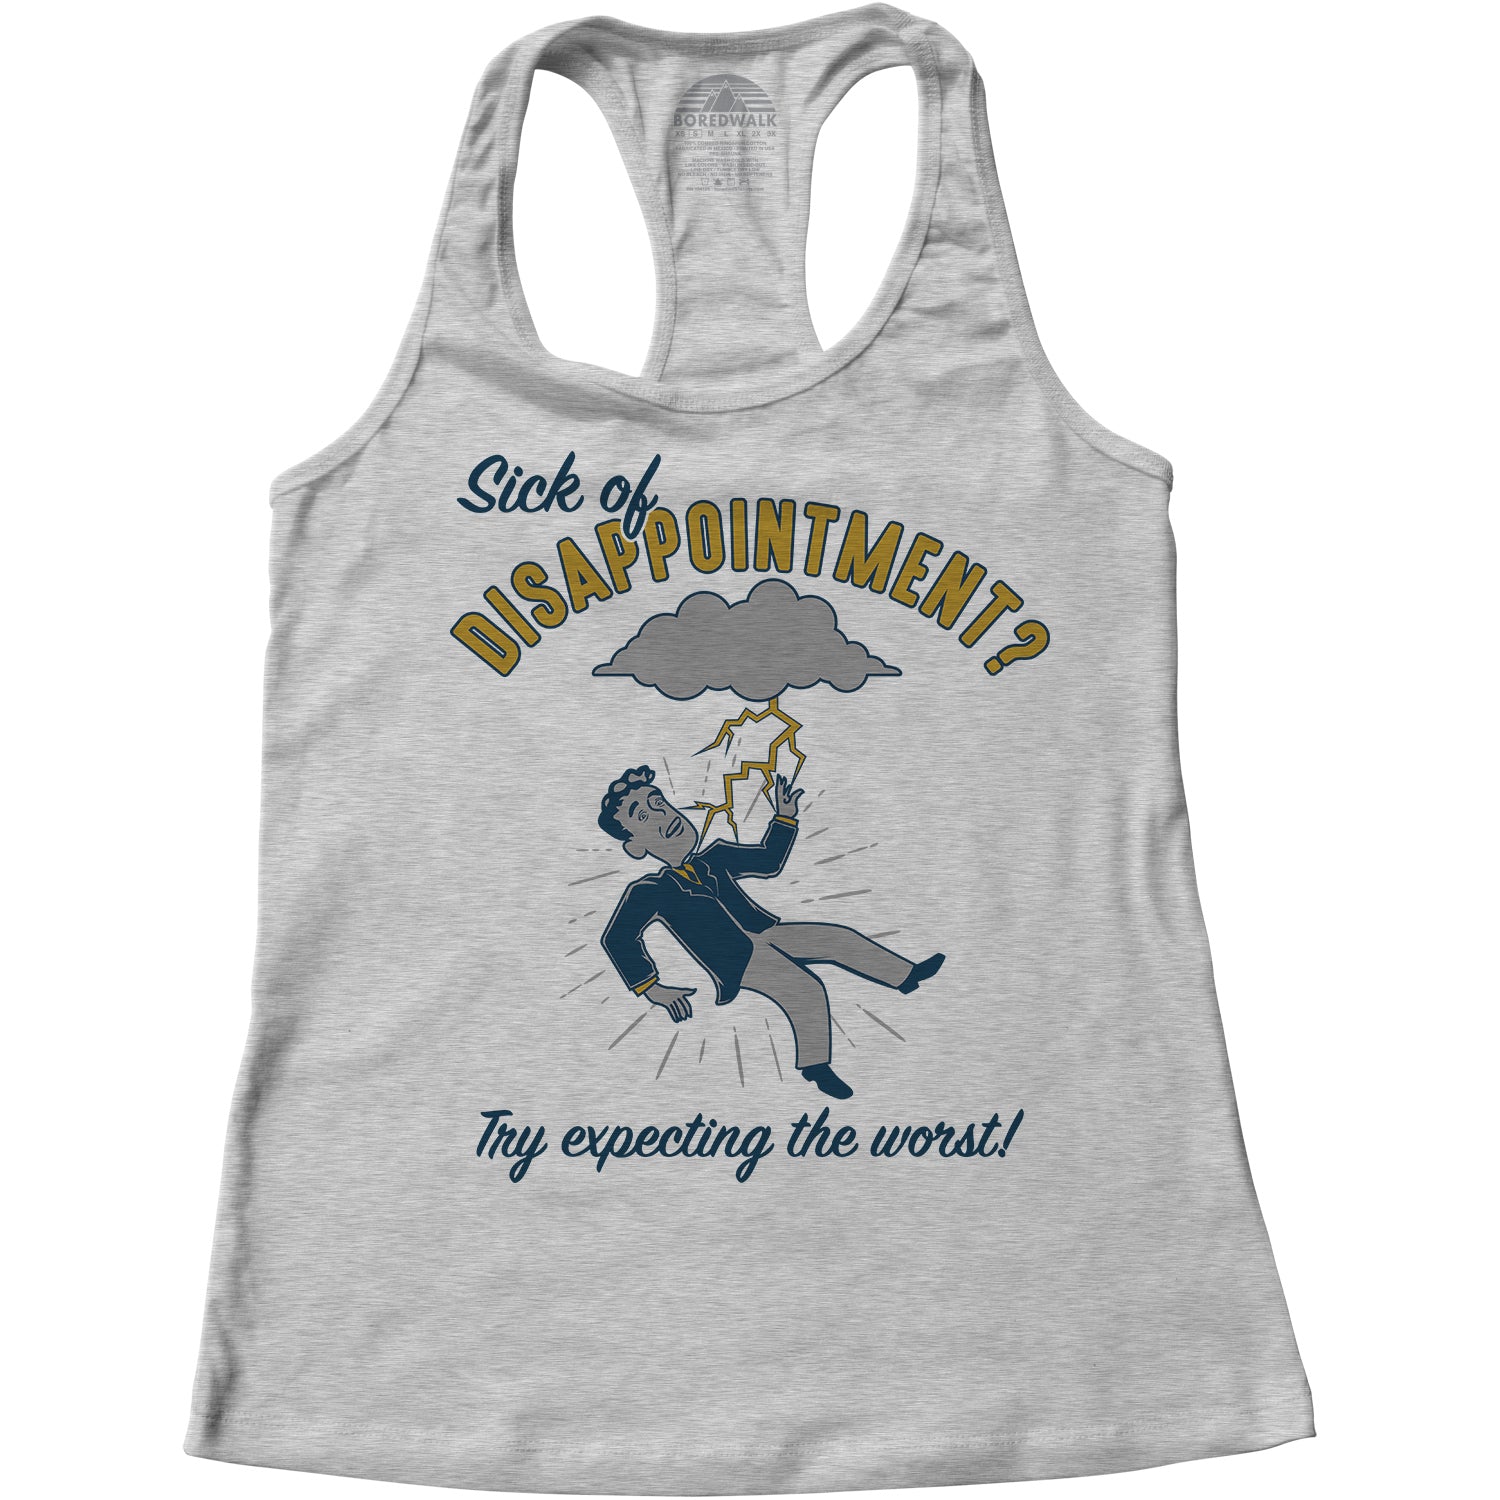 Women's Sick of Disappointment? Try Expecting The Worst! Racerback Tank Top